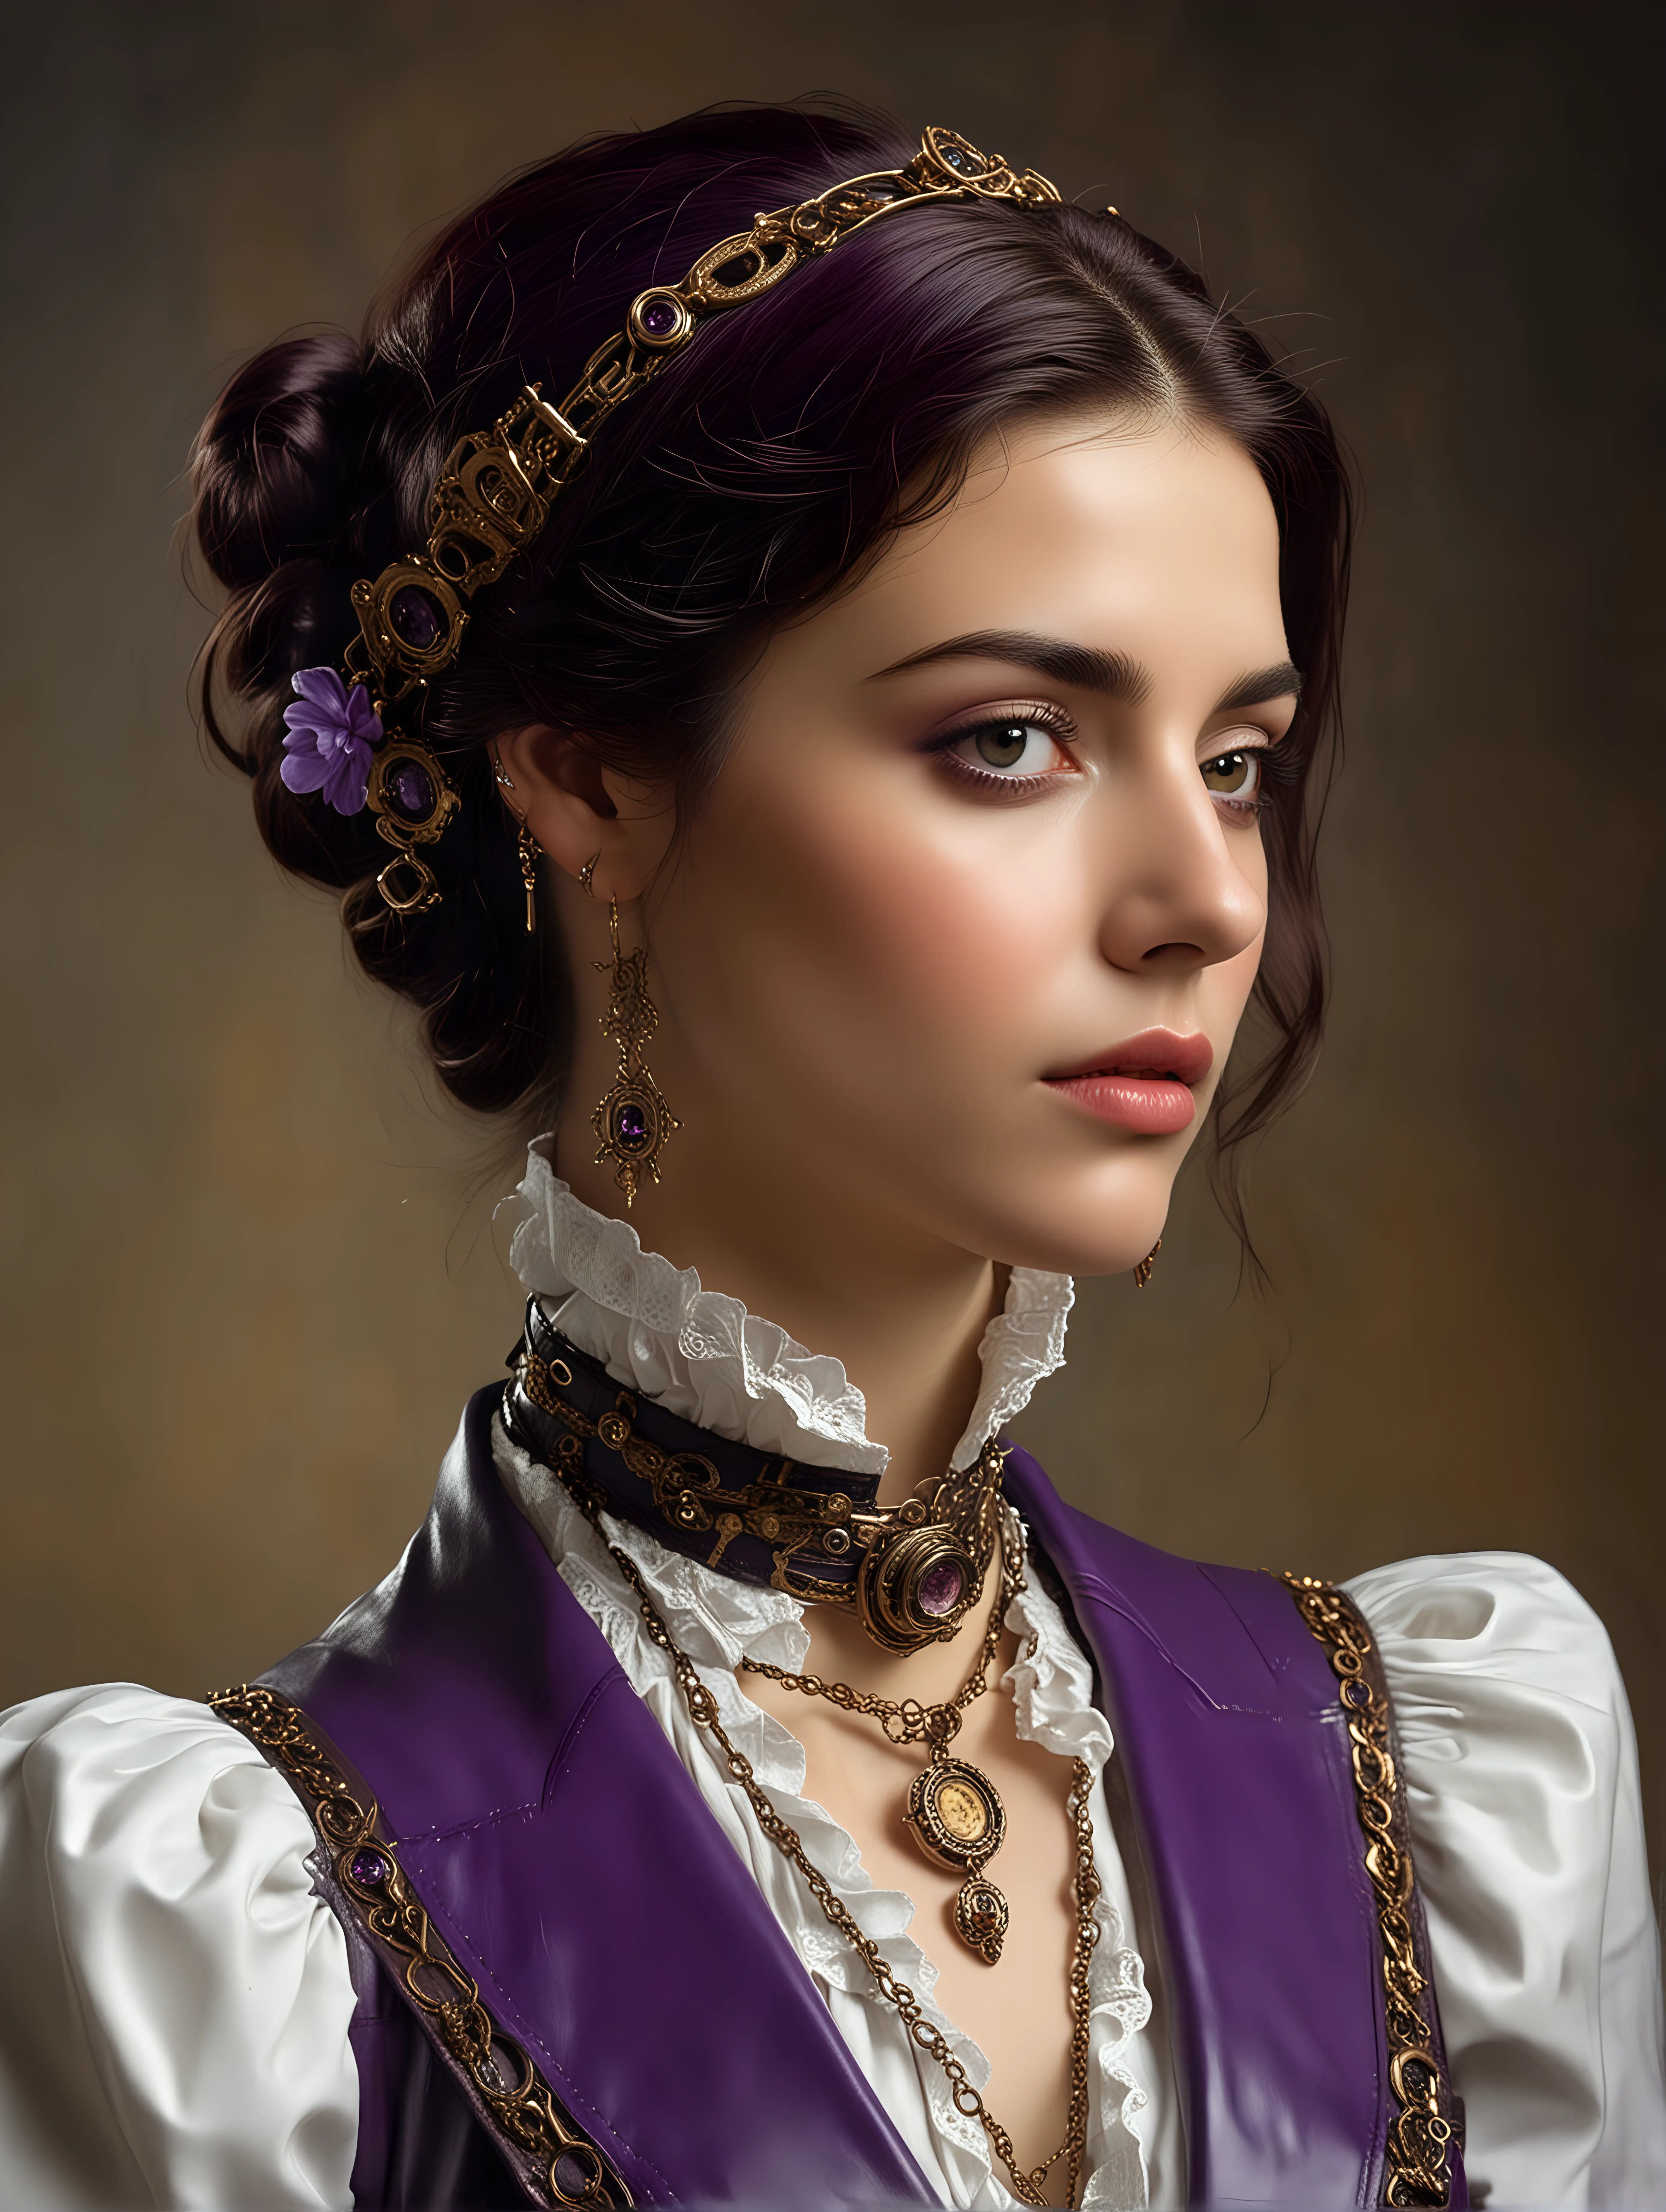 Portrait of a Noble Spanish Woman in Leather Suit with Steampunk Jewelry